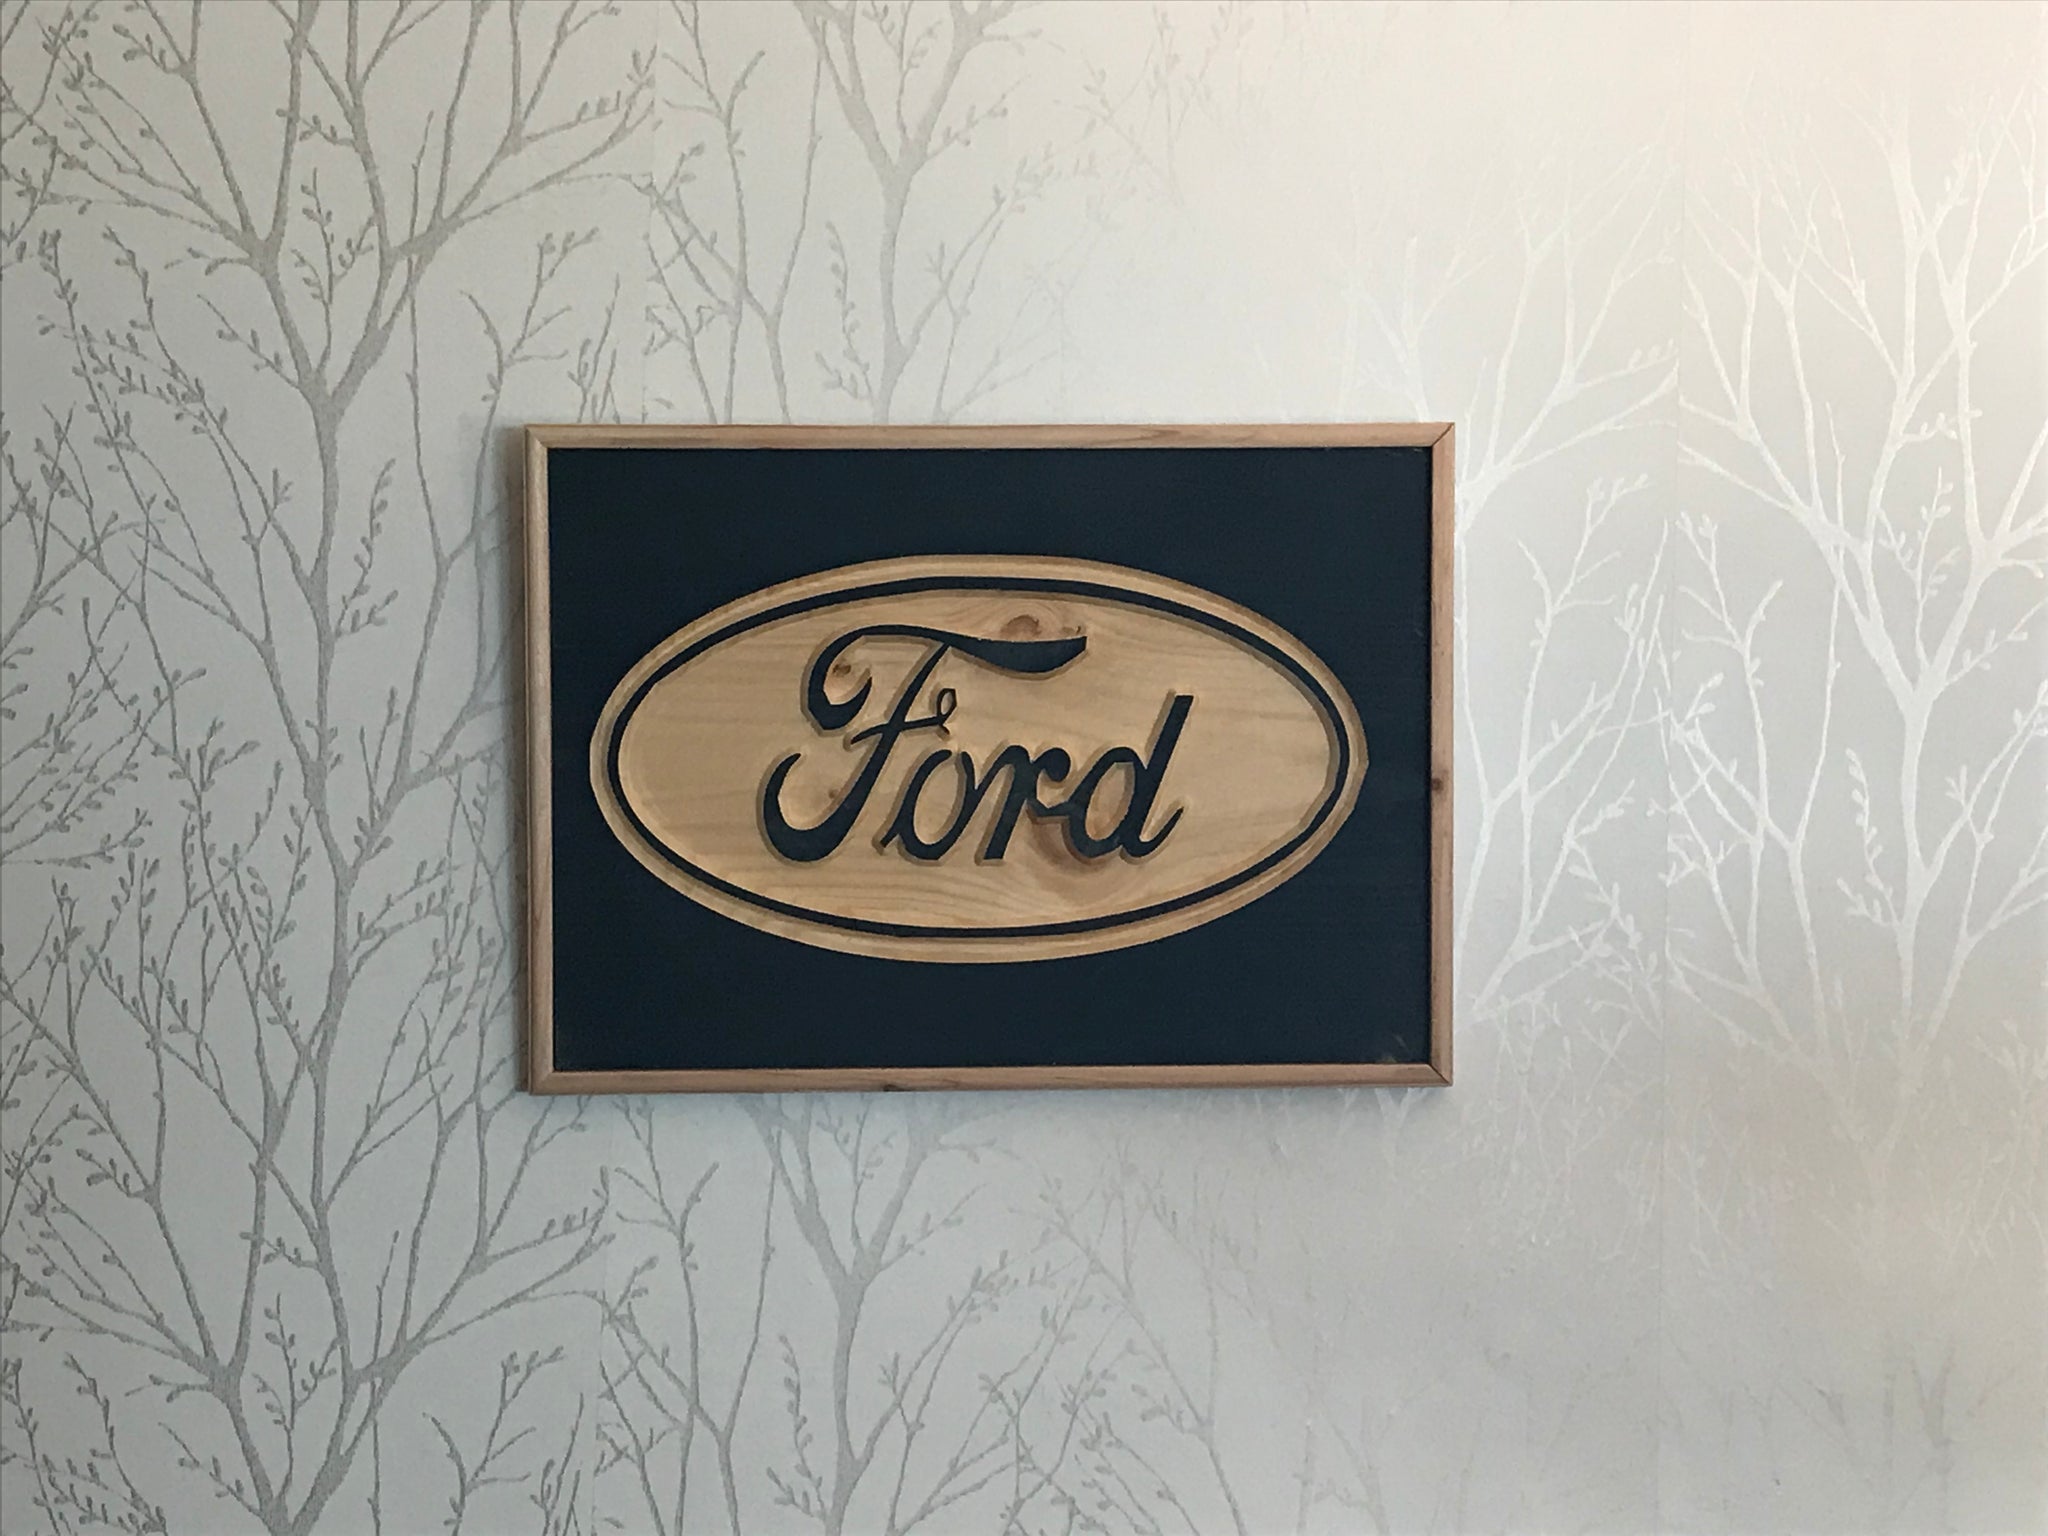 Ford logo carved in wood